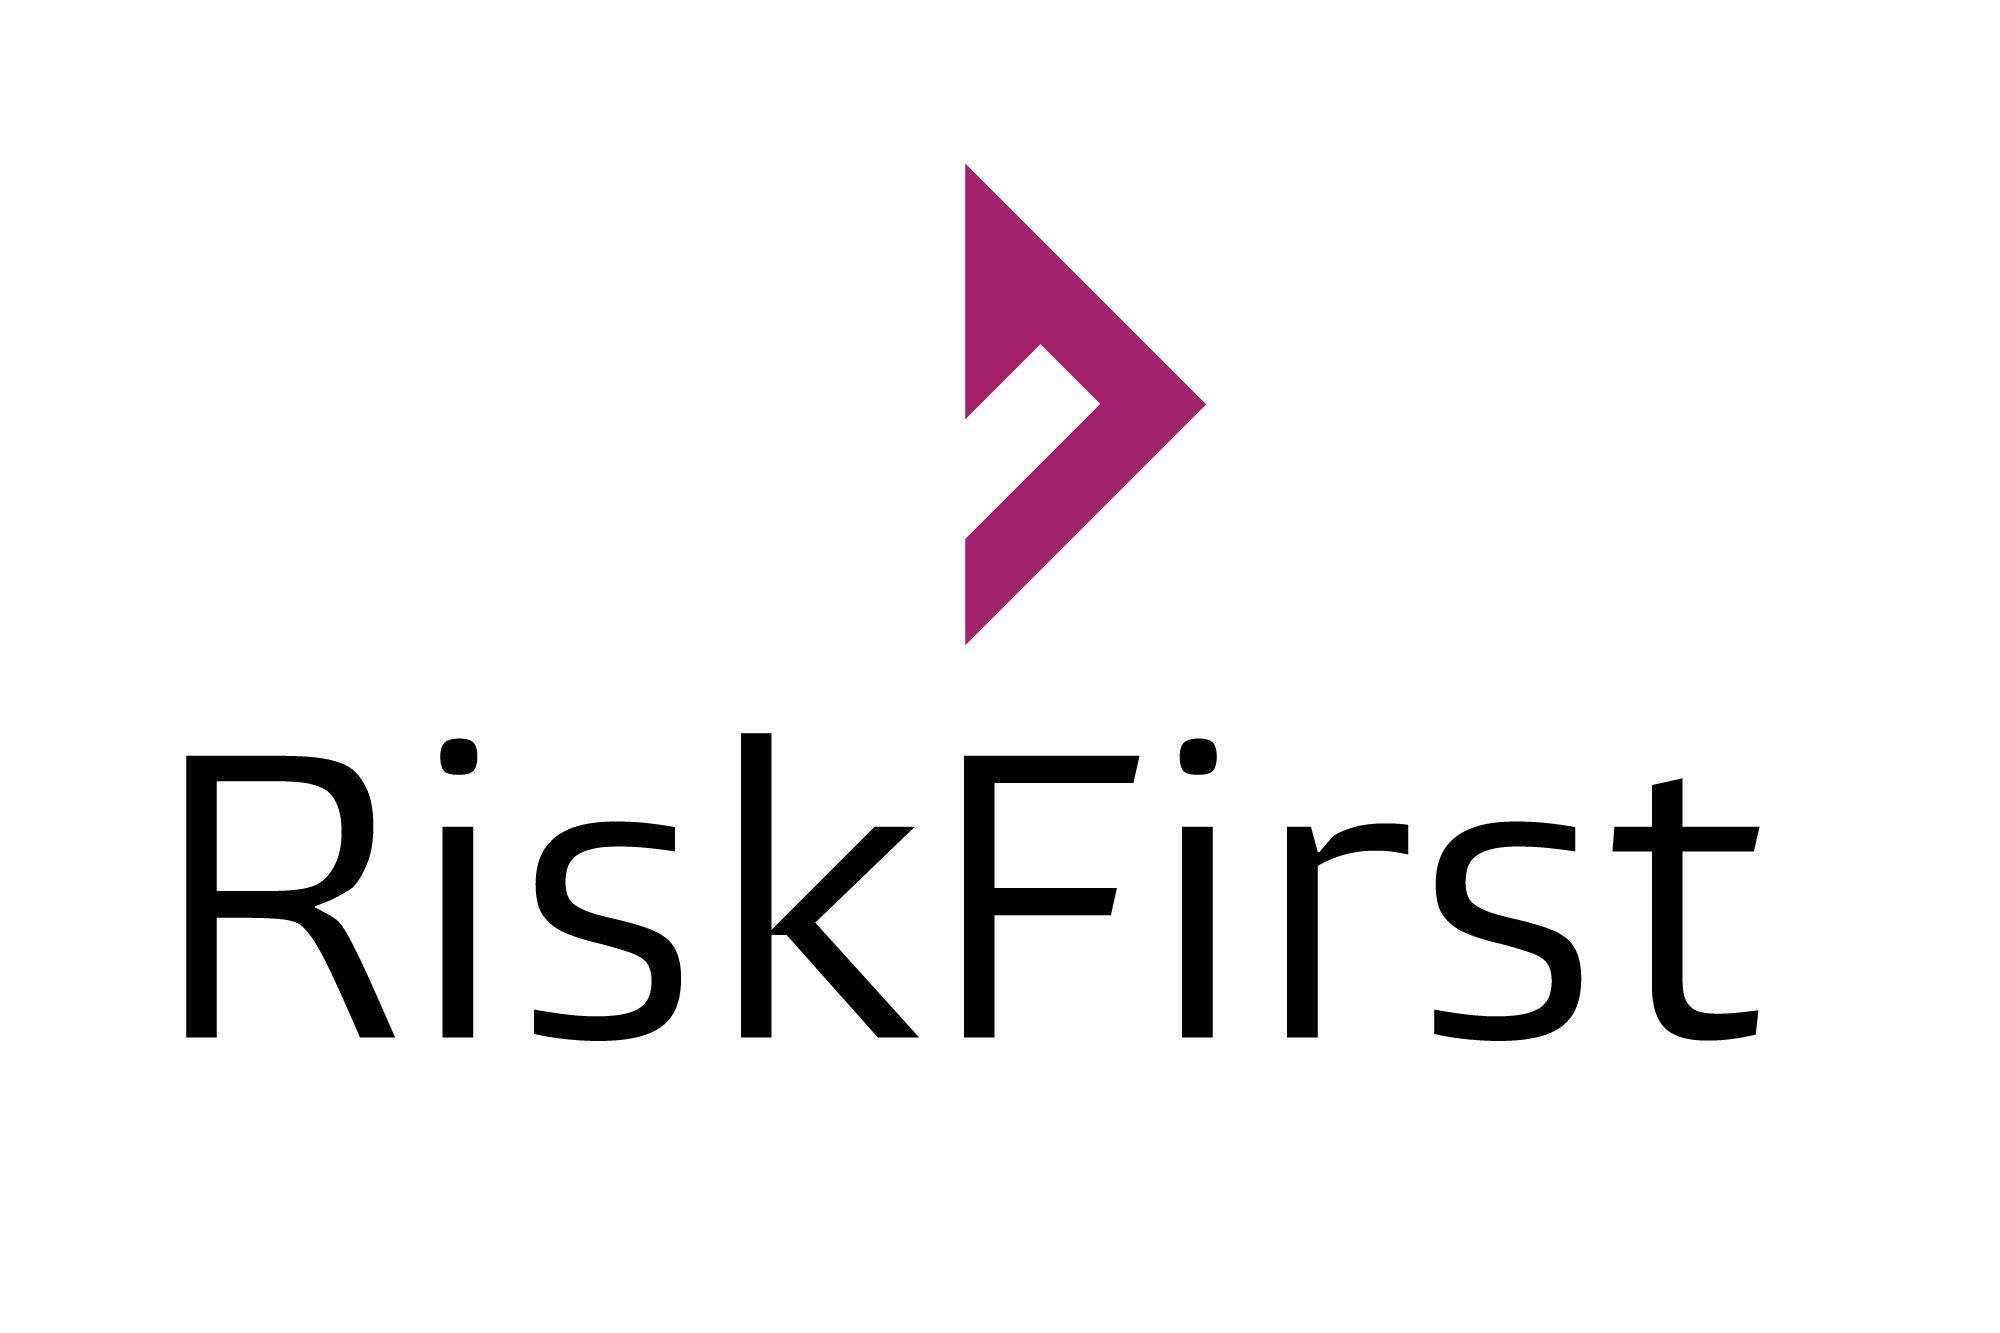 Cashflow Driven Investment becomes a reality as allocation doubles over 18 months, says RiskFirst 